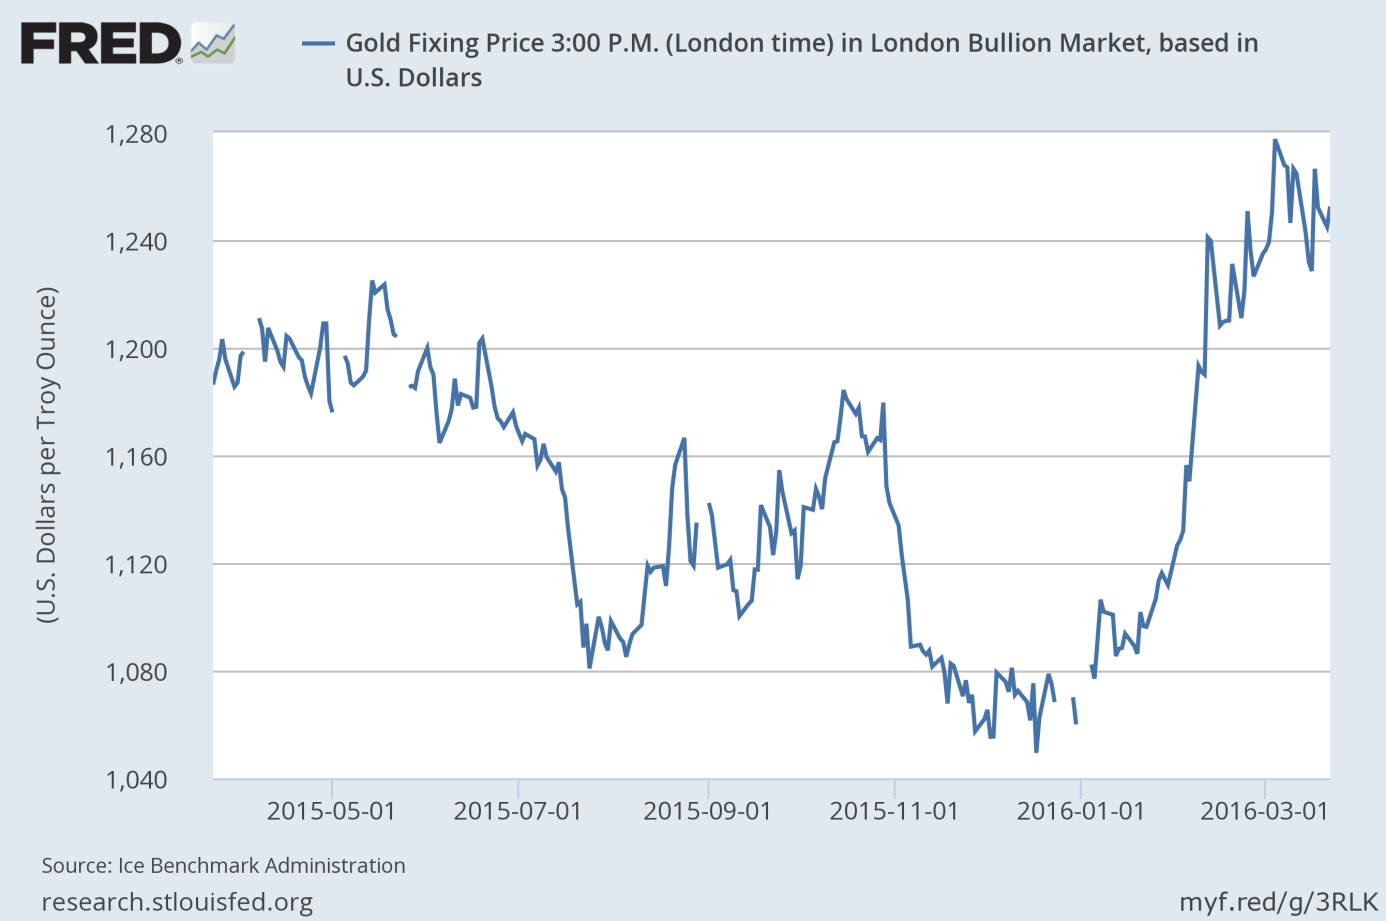 Price of gold (London P.M. Fix) over the last 12 months.